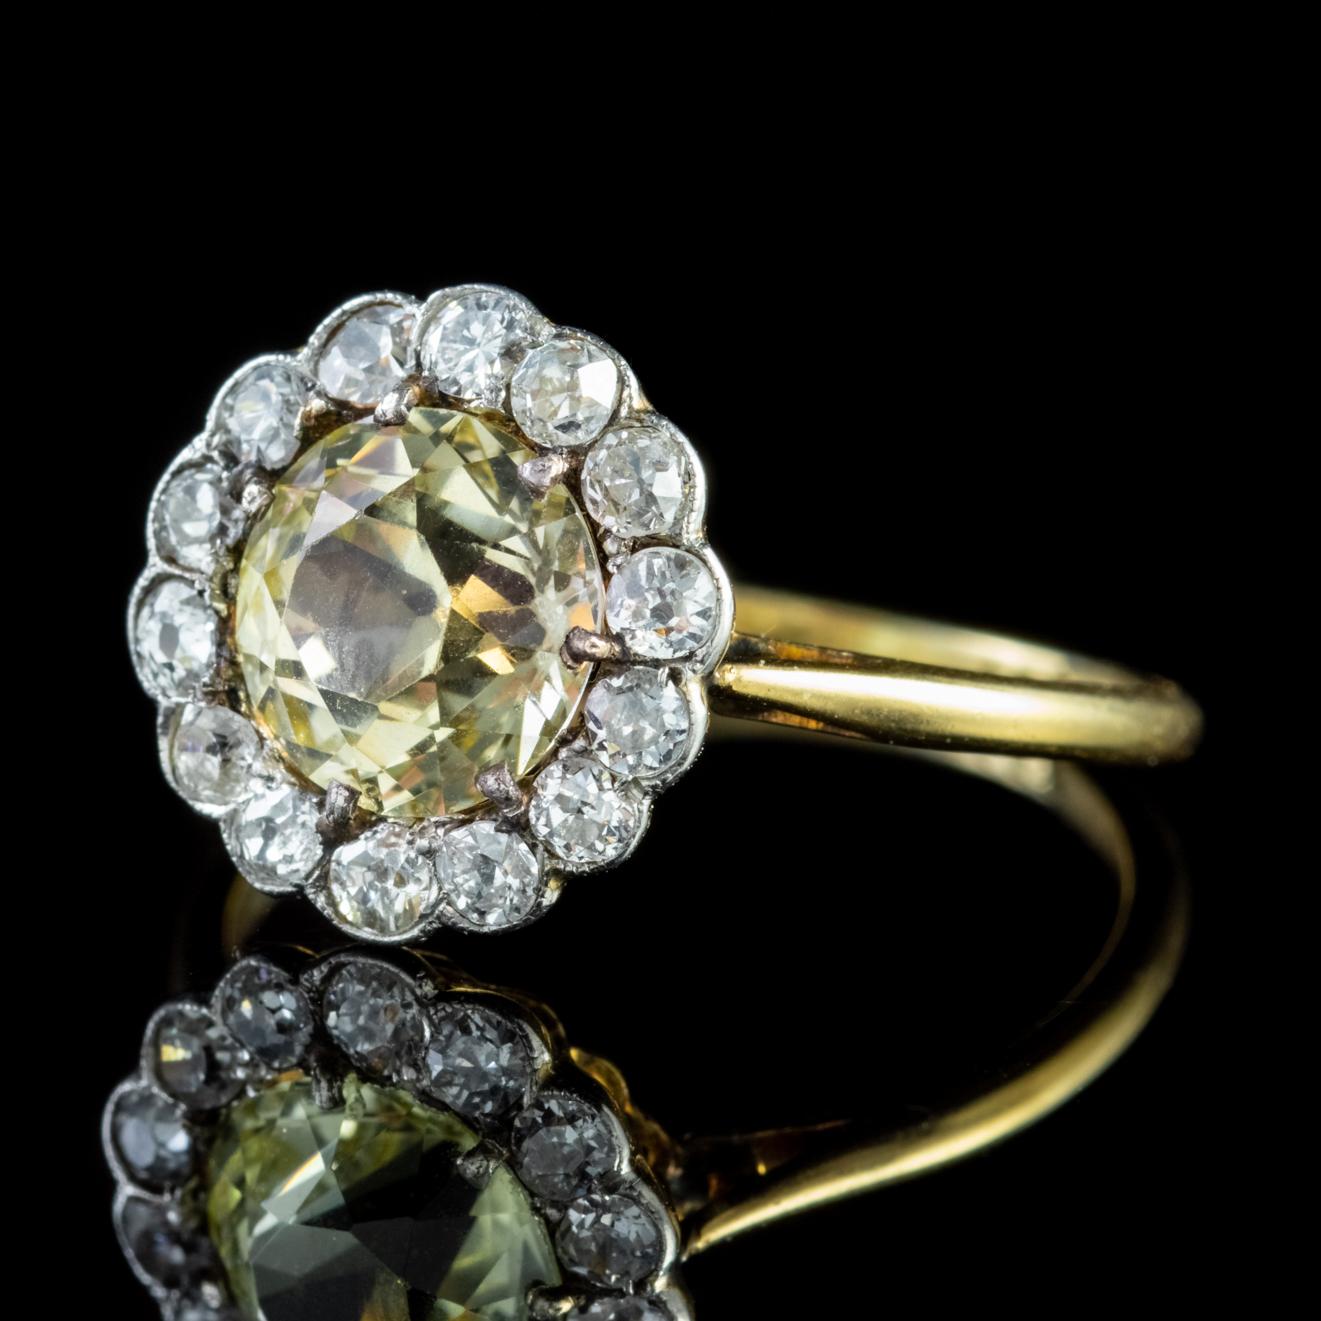 This stunning Antique Victorian ring has been expertly crafted around a 2ct cushion cut yellow Sapphire. The central stone is encircled by a halo of fourteen old cut Diamonds, approx. 0.05ct each, 0.7ct in total. 

The Yellow Sapphire boasts a